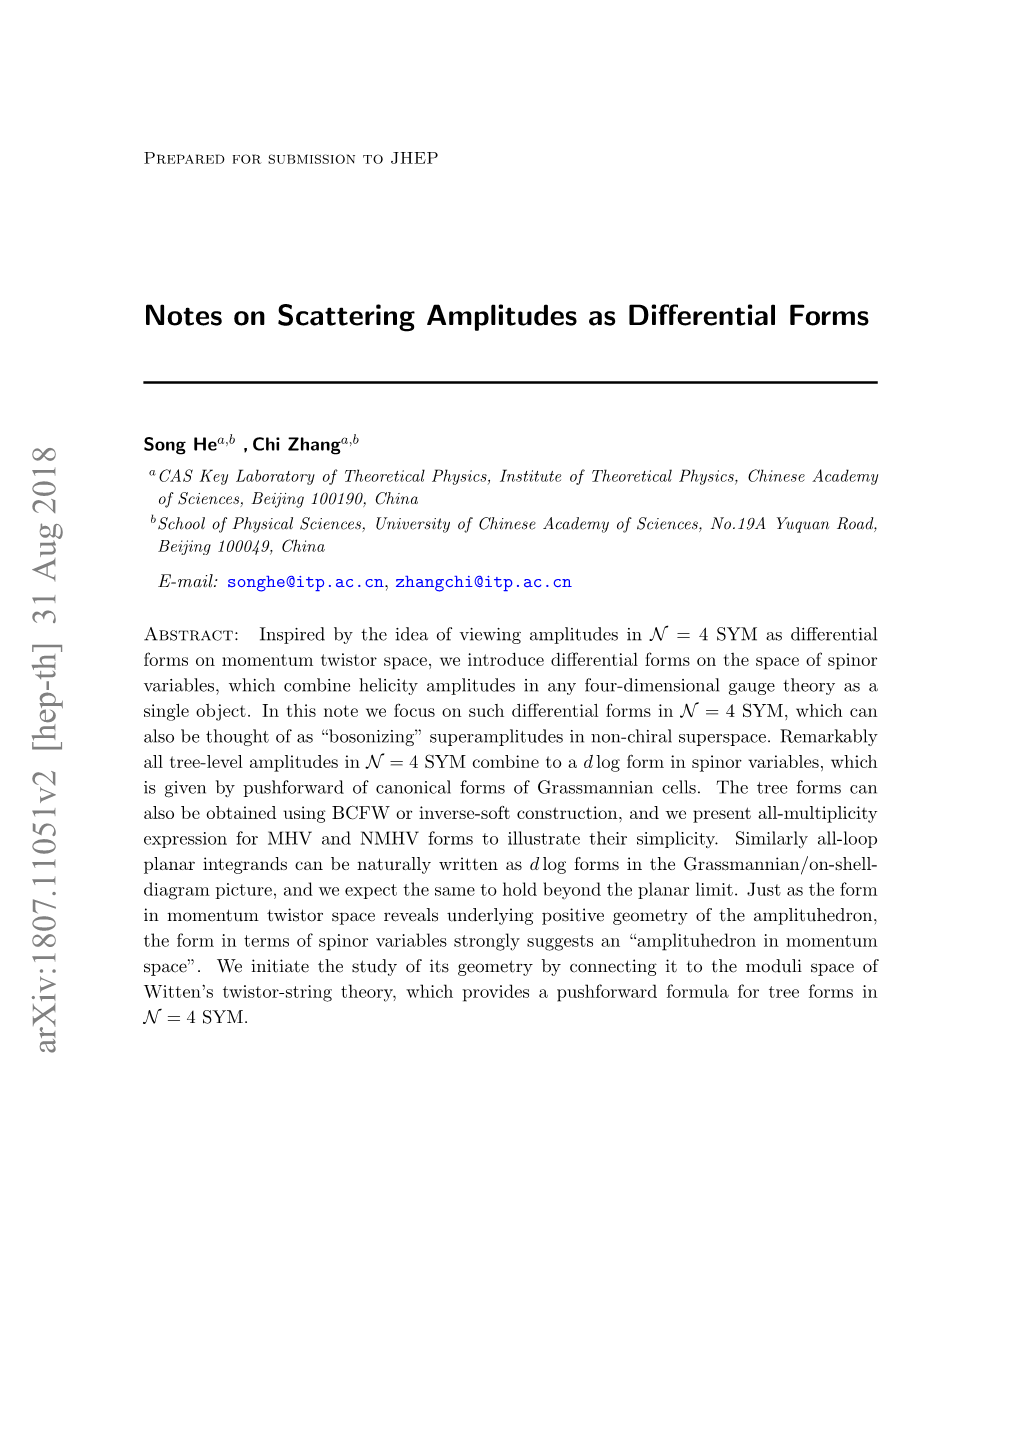 Notes on Scattering Amplitudes As Differential Forms